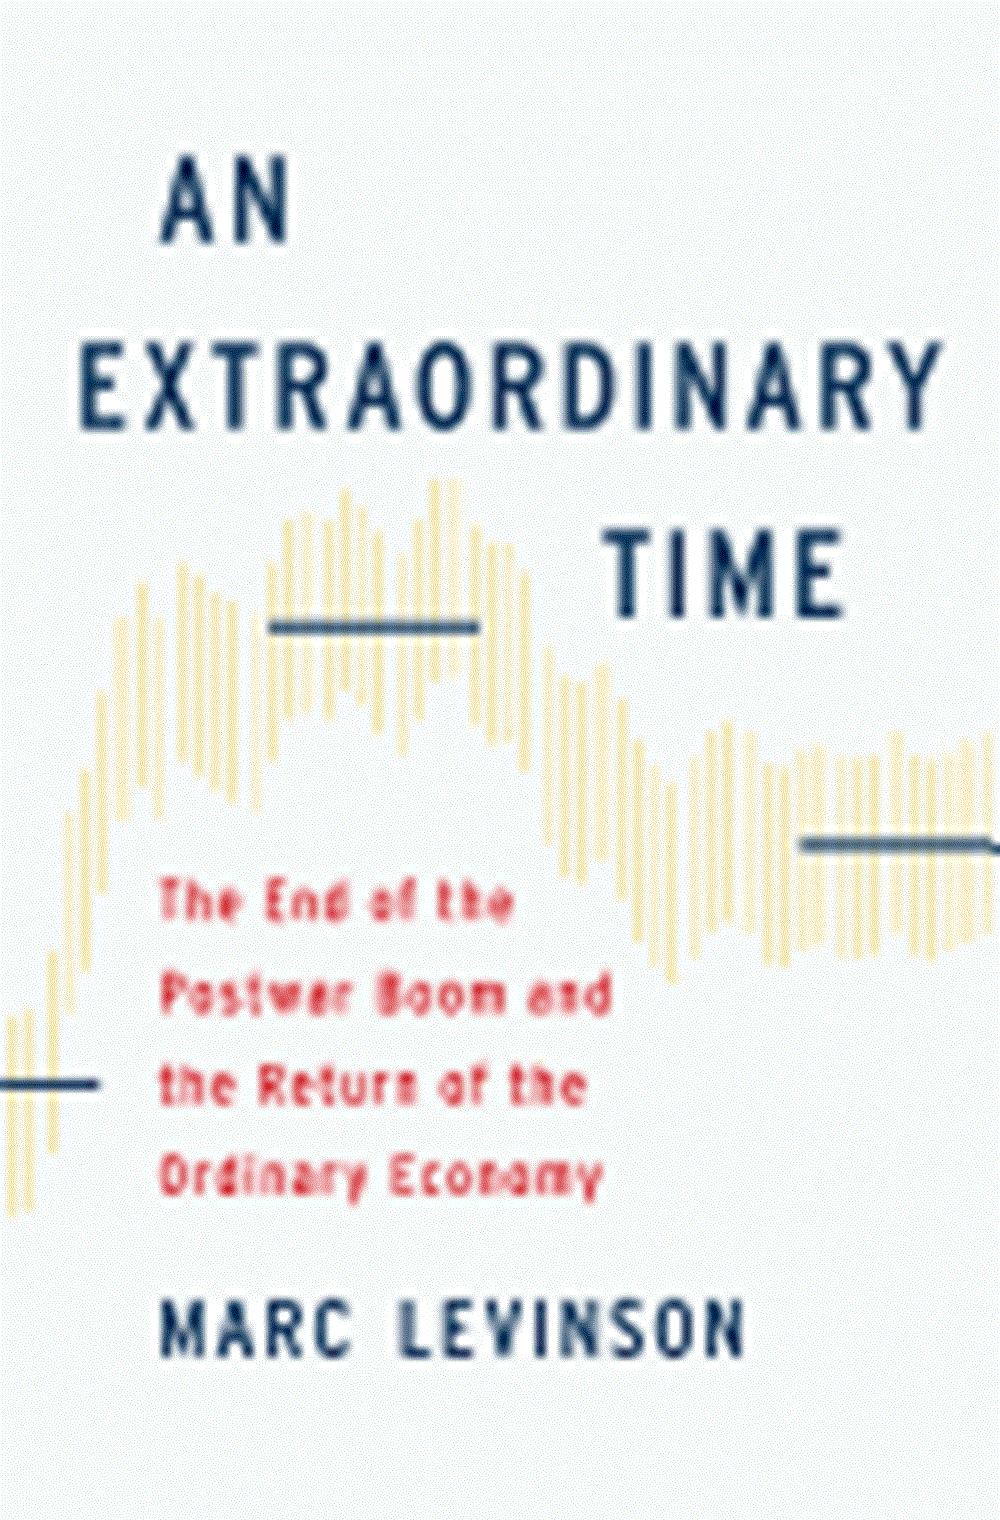 Extraordinary Time The End of the Postwar Boom and the Return of the Ordinary Economy